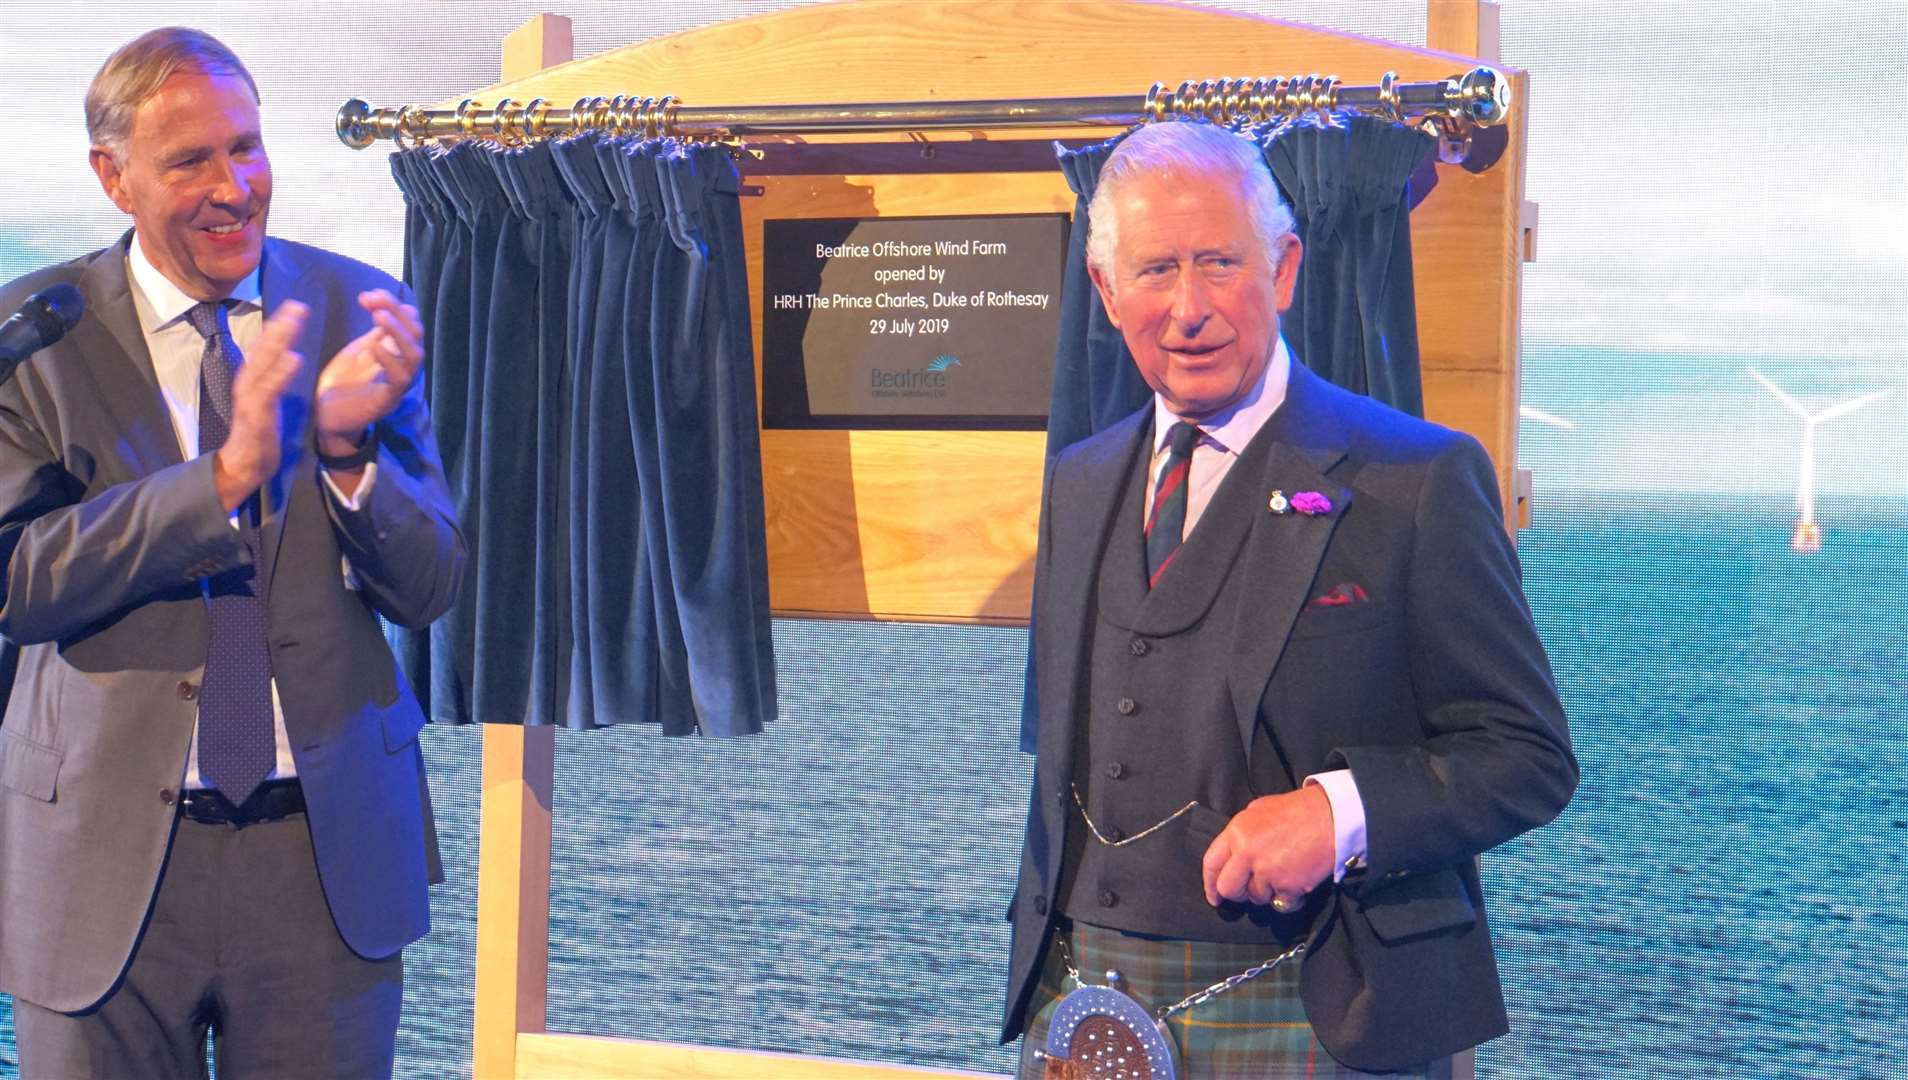 Prince Charles unveiling a plaque in Wick to mark the opening of the Bowl development this summer.